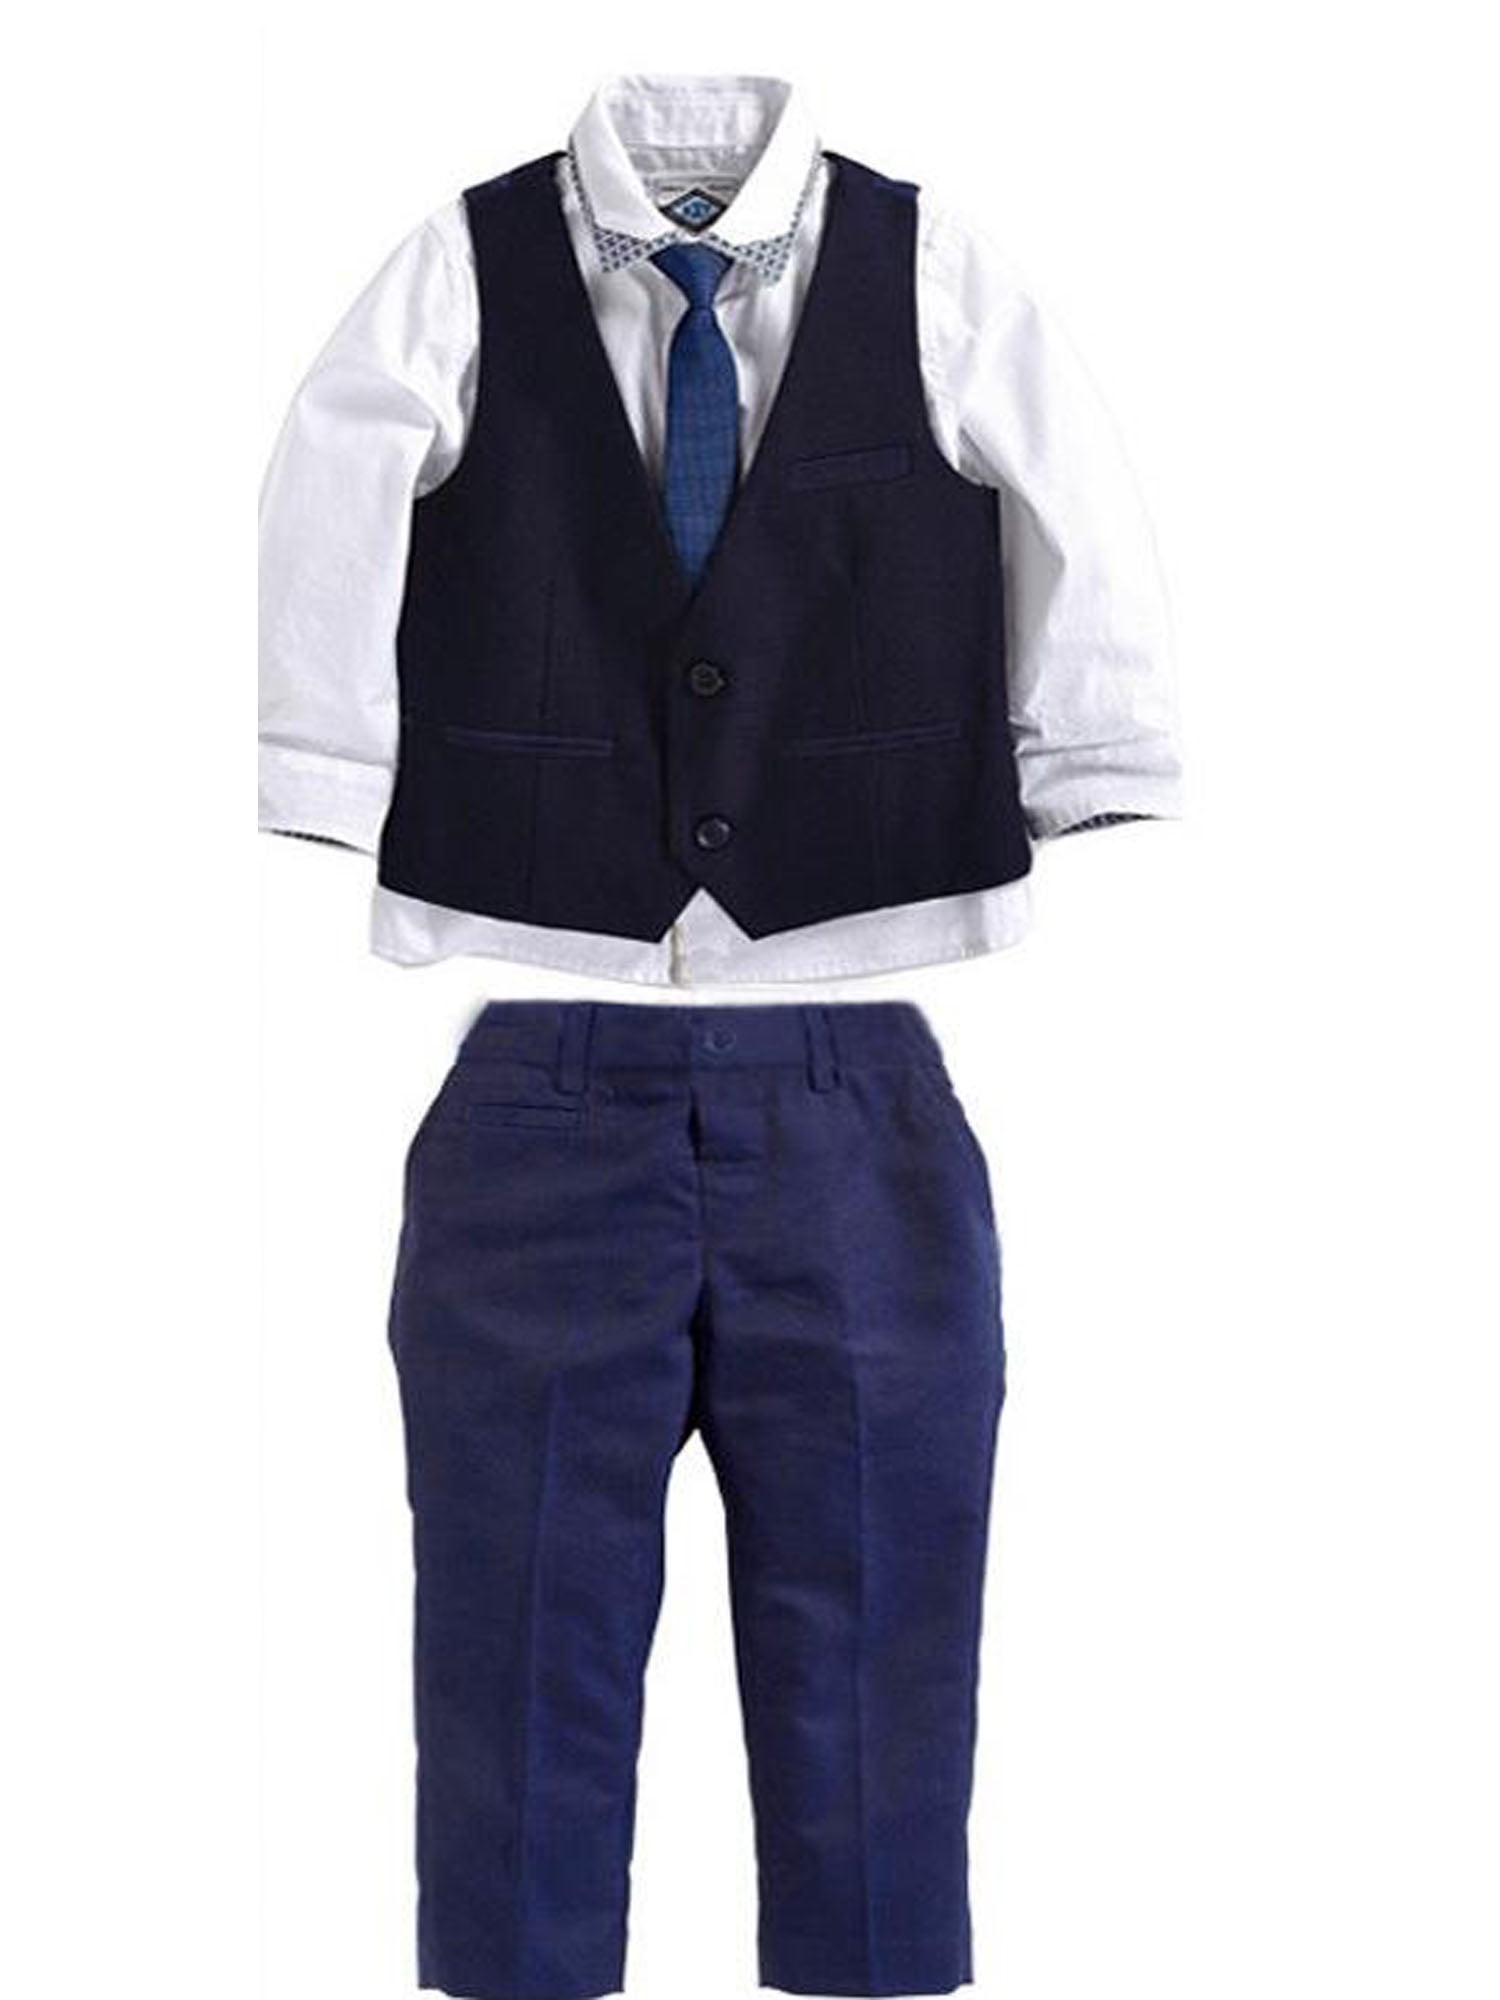 White Shirt with Bowtie Waistcoat Pants Hat 4pcs Set mintgreen Baby Boy Outfits Gentleman Suit Size:1-5 Years